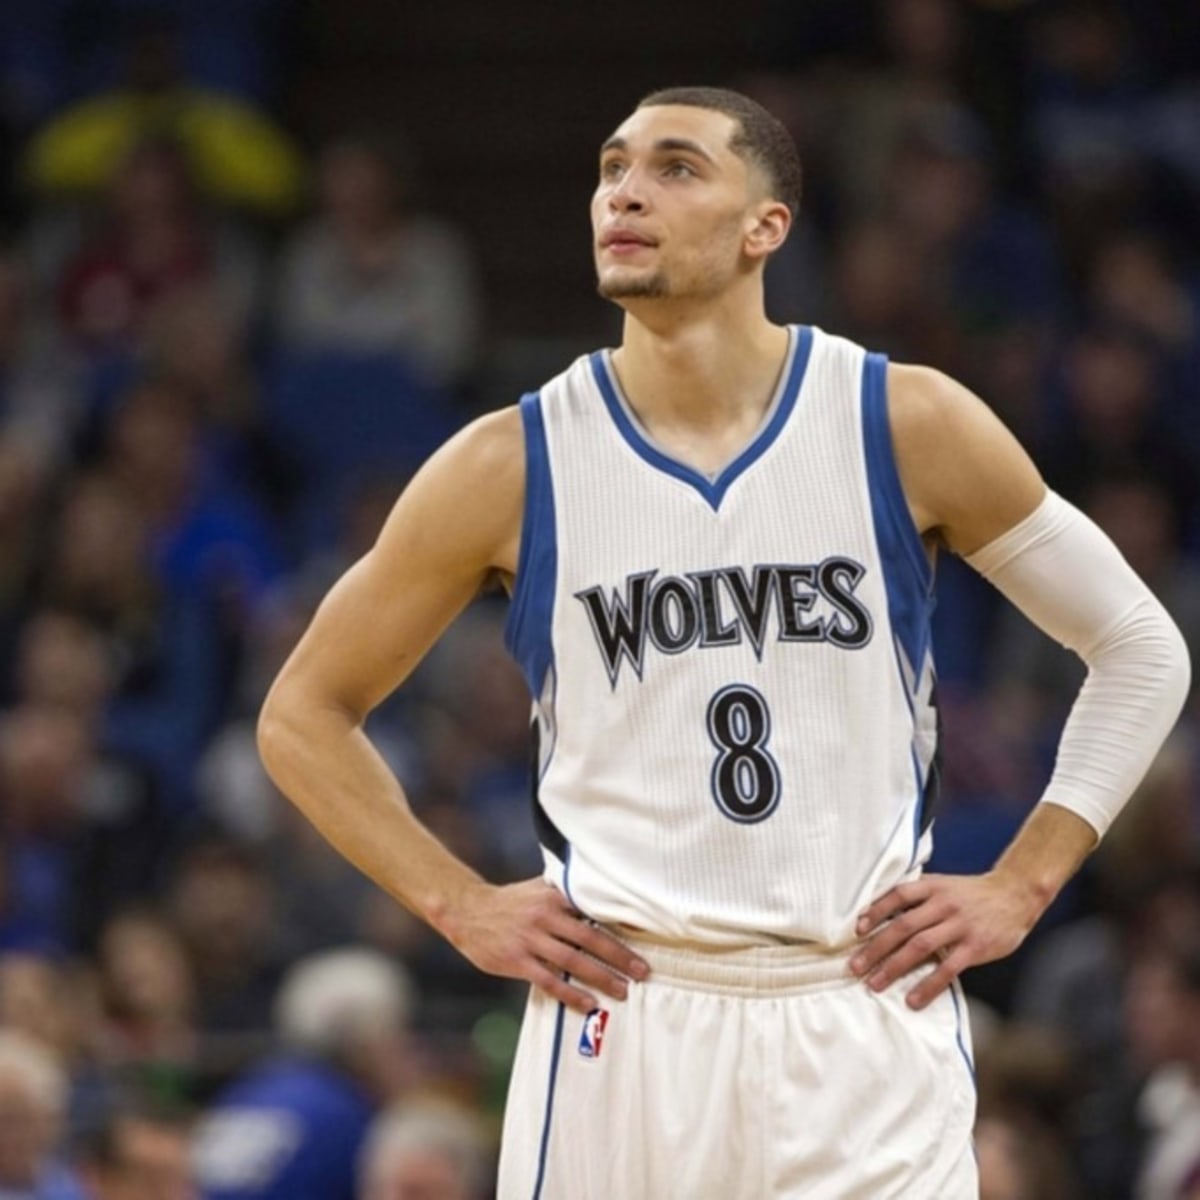 Zach LaVine was terrified to ask Nikola Pekovic for his jersey number -  Eurohoops